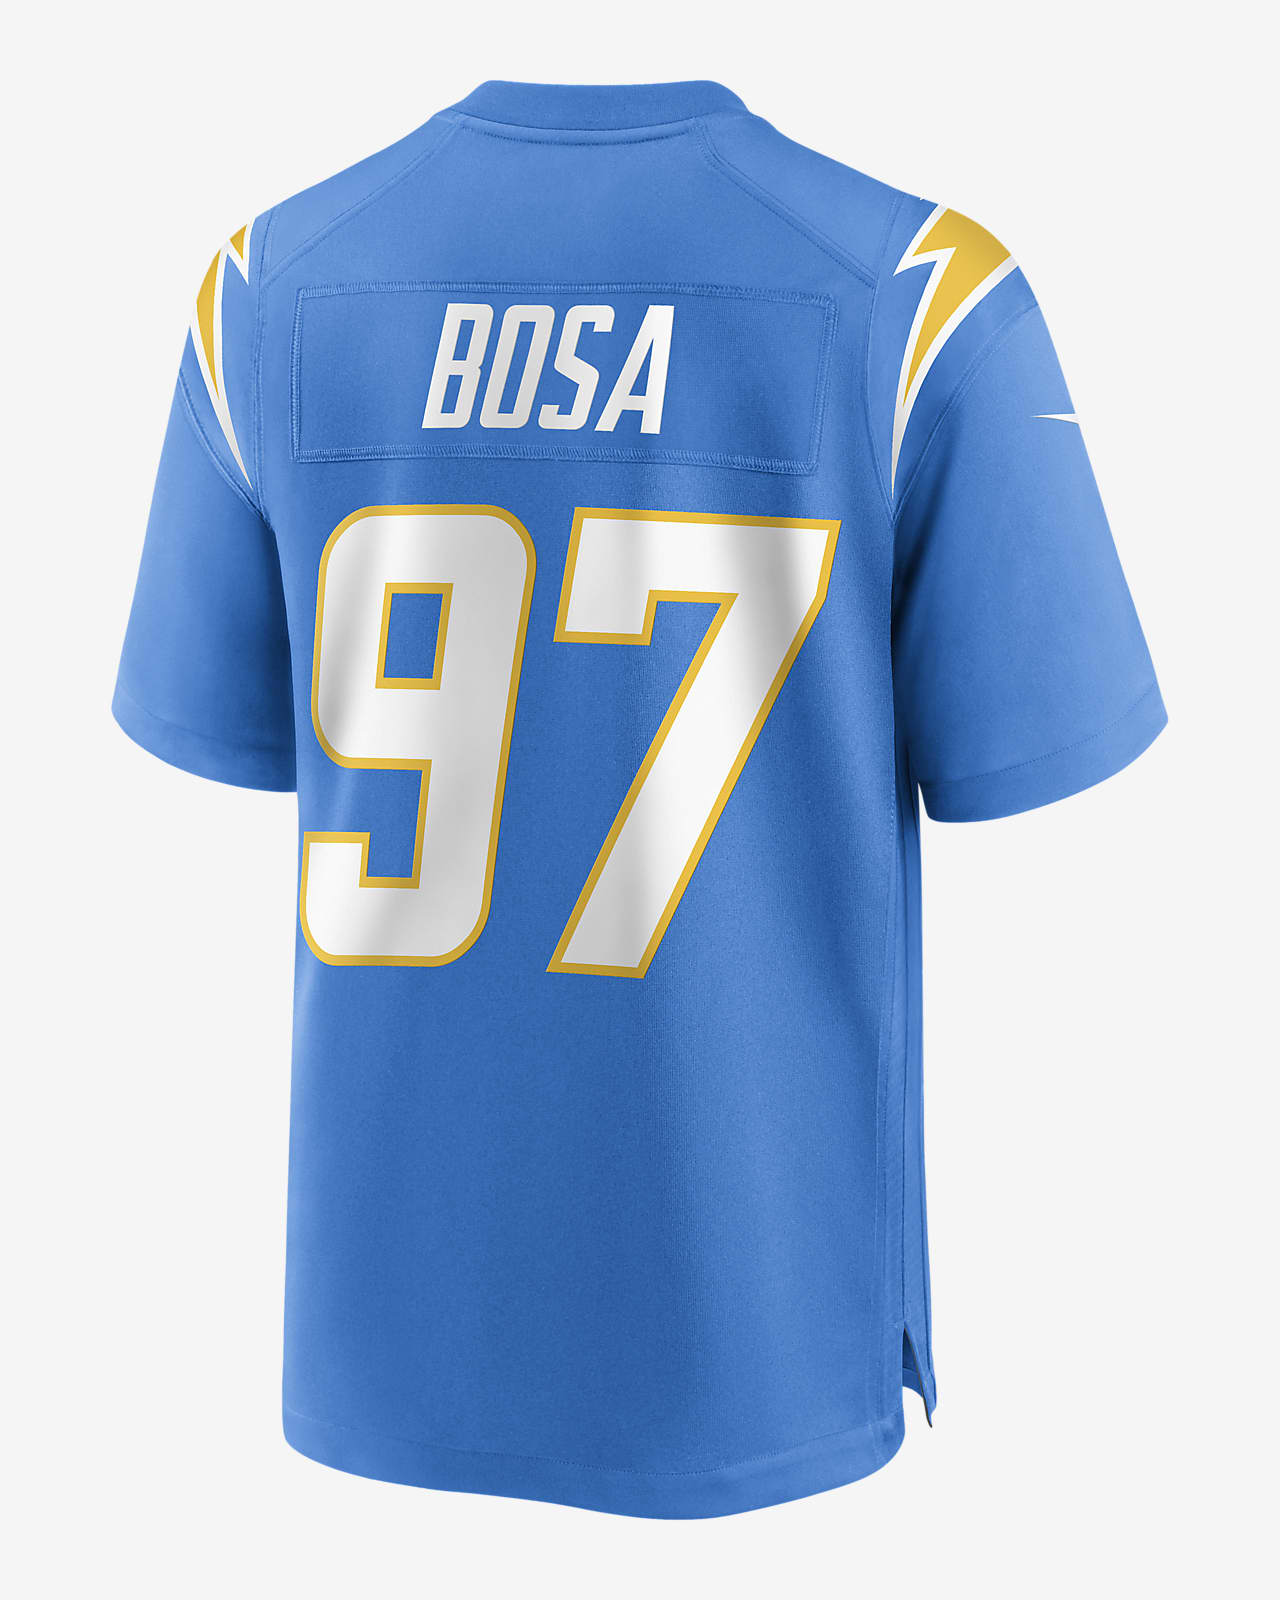 NFL Los Angeles Chargers (Joey Bosa) Men's Game Football Jersey.